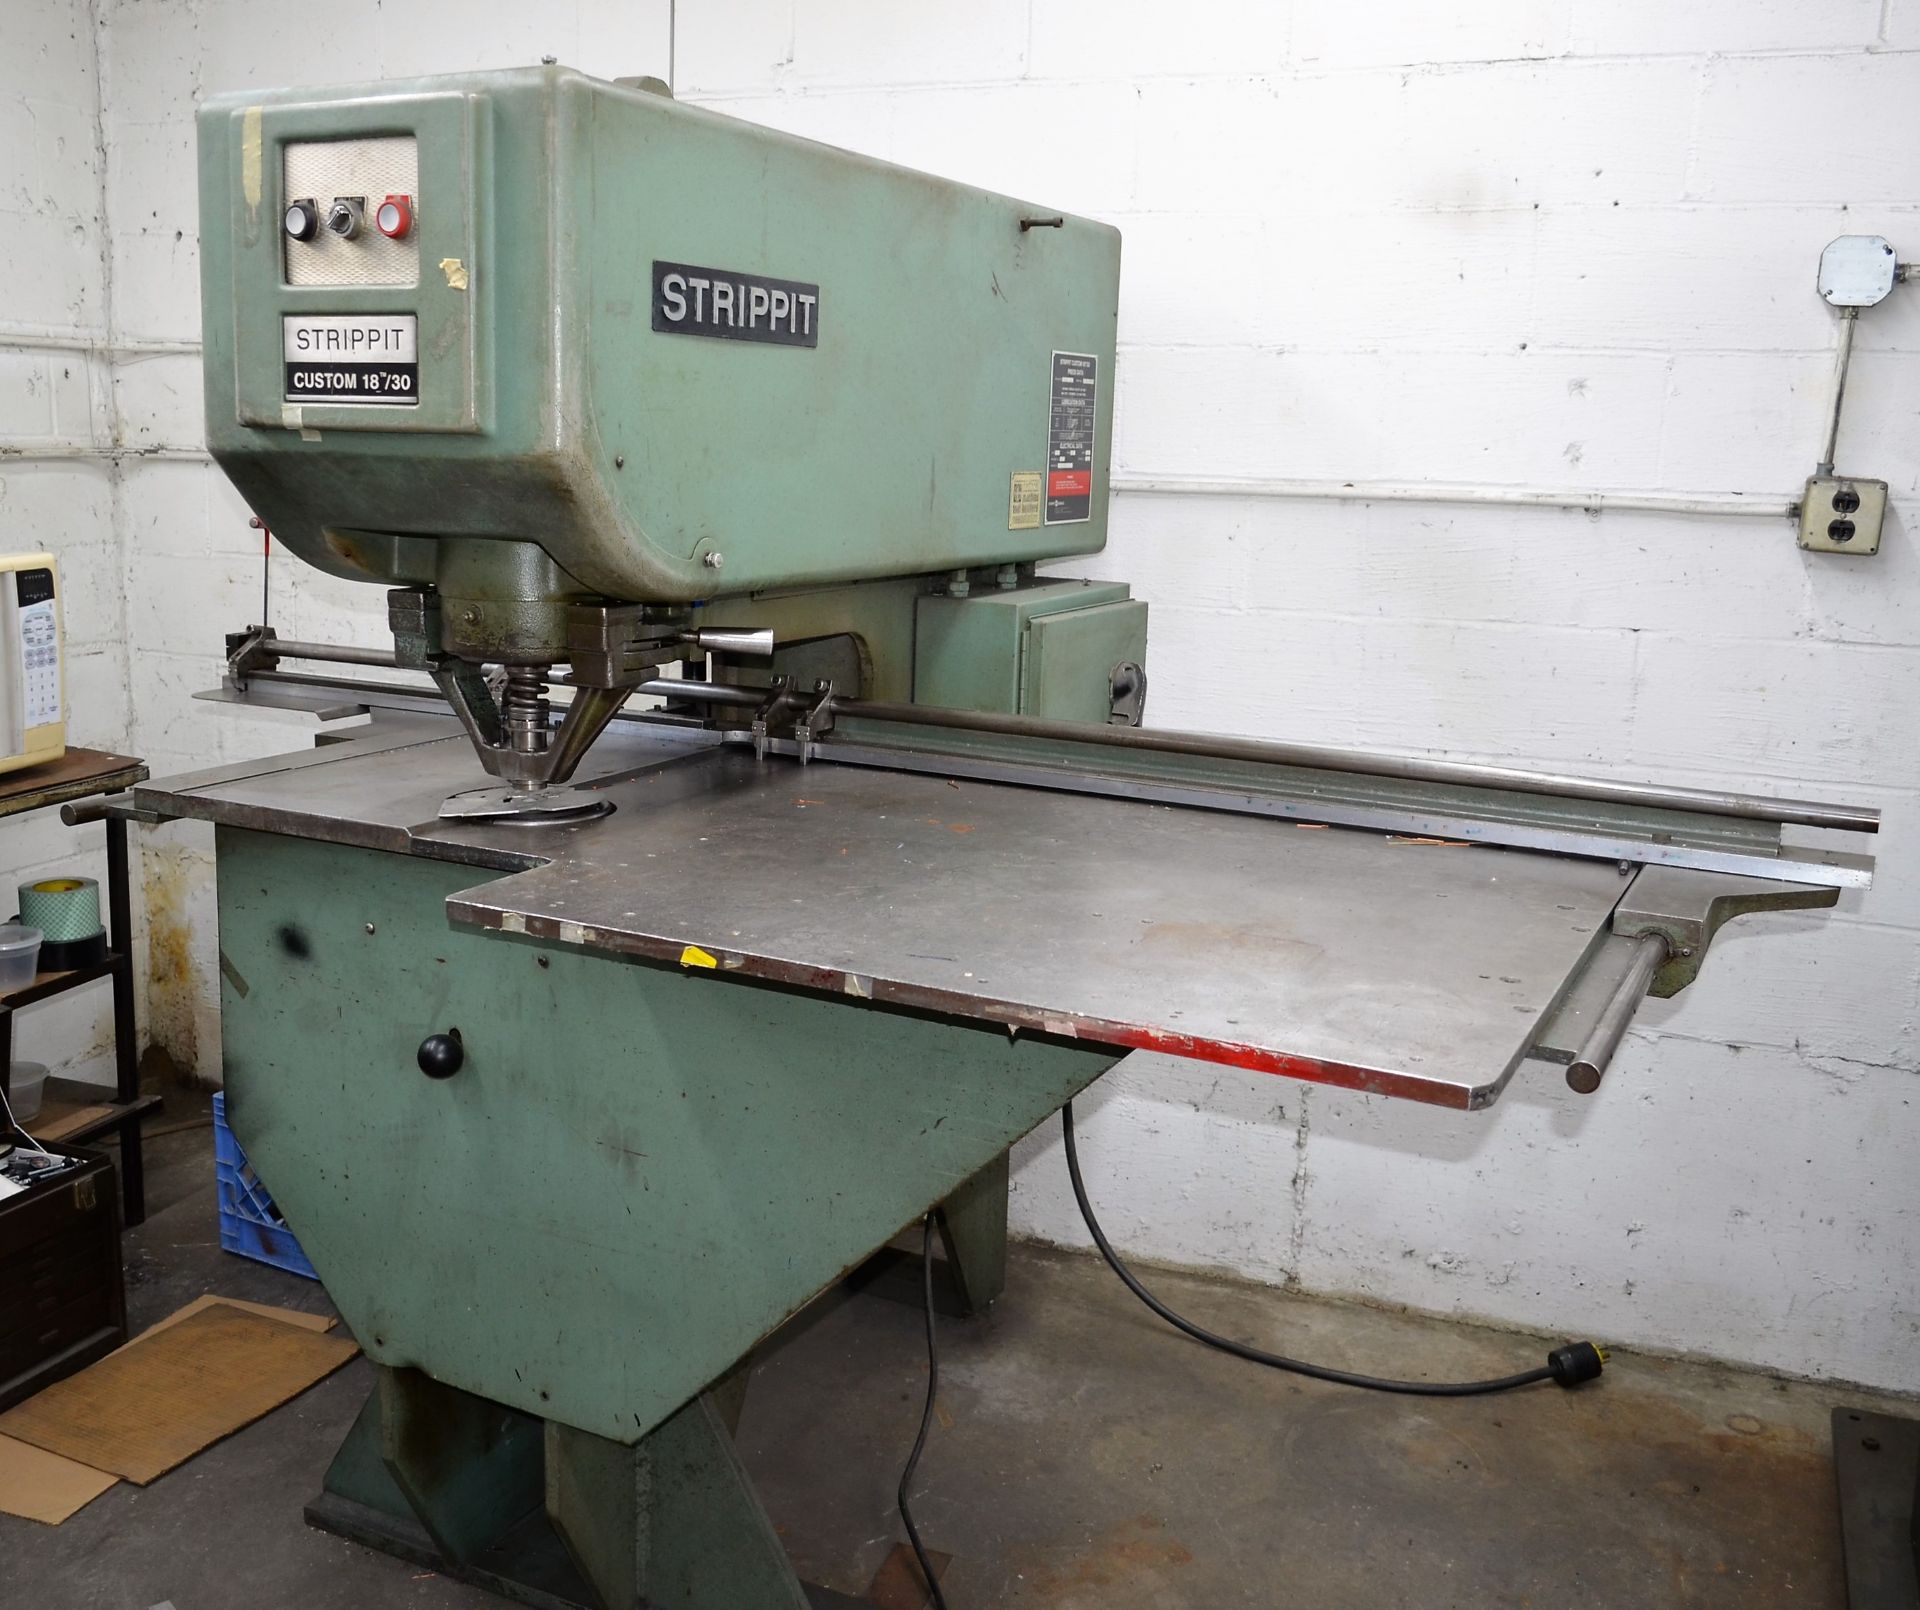 STRIPPIT CUSTOM 18/30 SINGLE END PUNCH PRESS, 30 TON CAP, WITH 60"X 30" TABLE S/N: 03041973